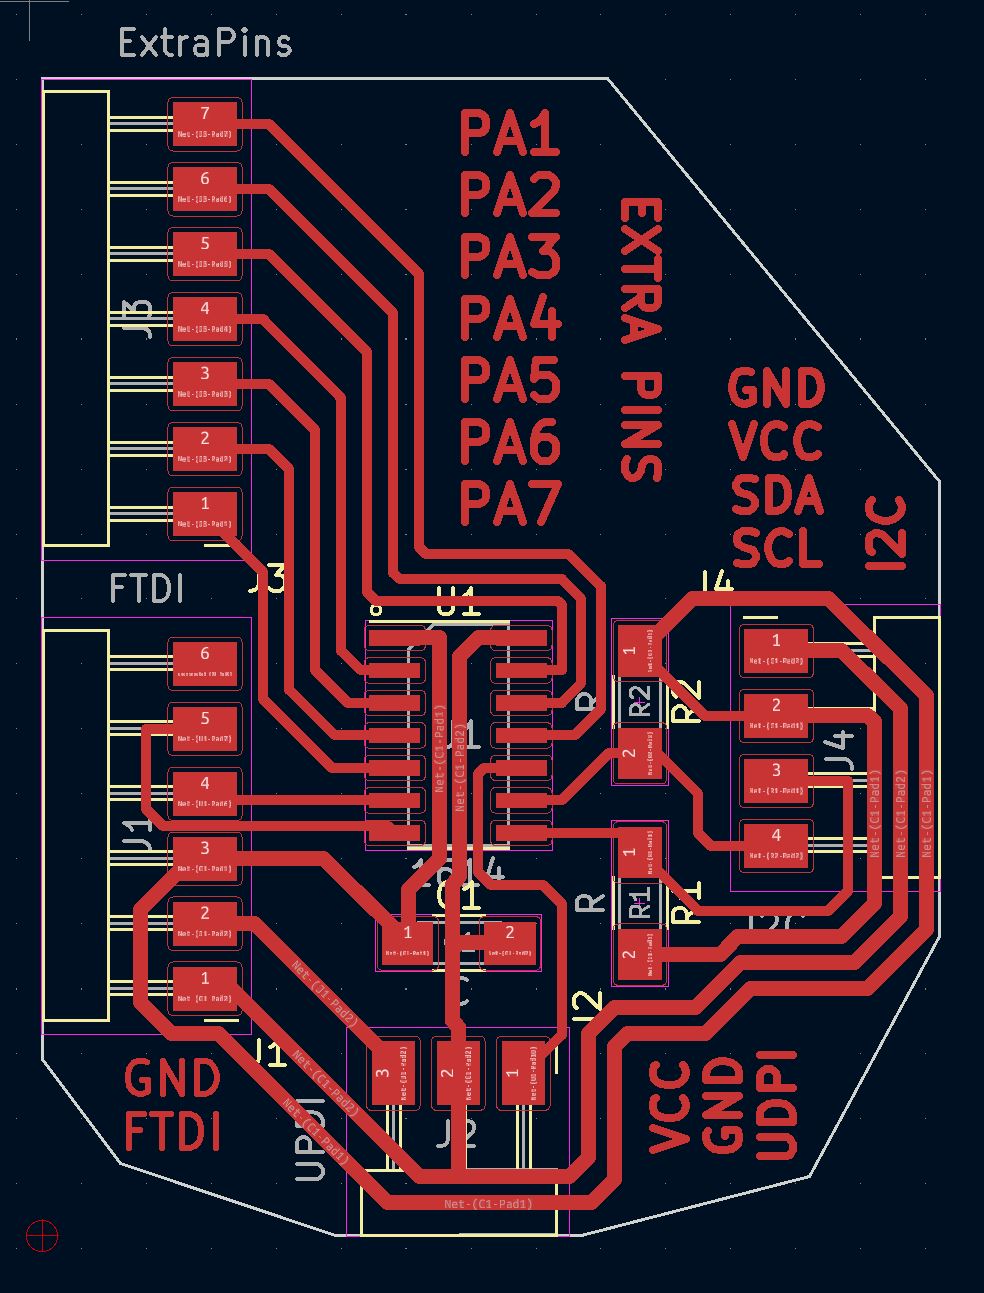 Updated PCB layout